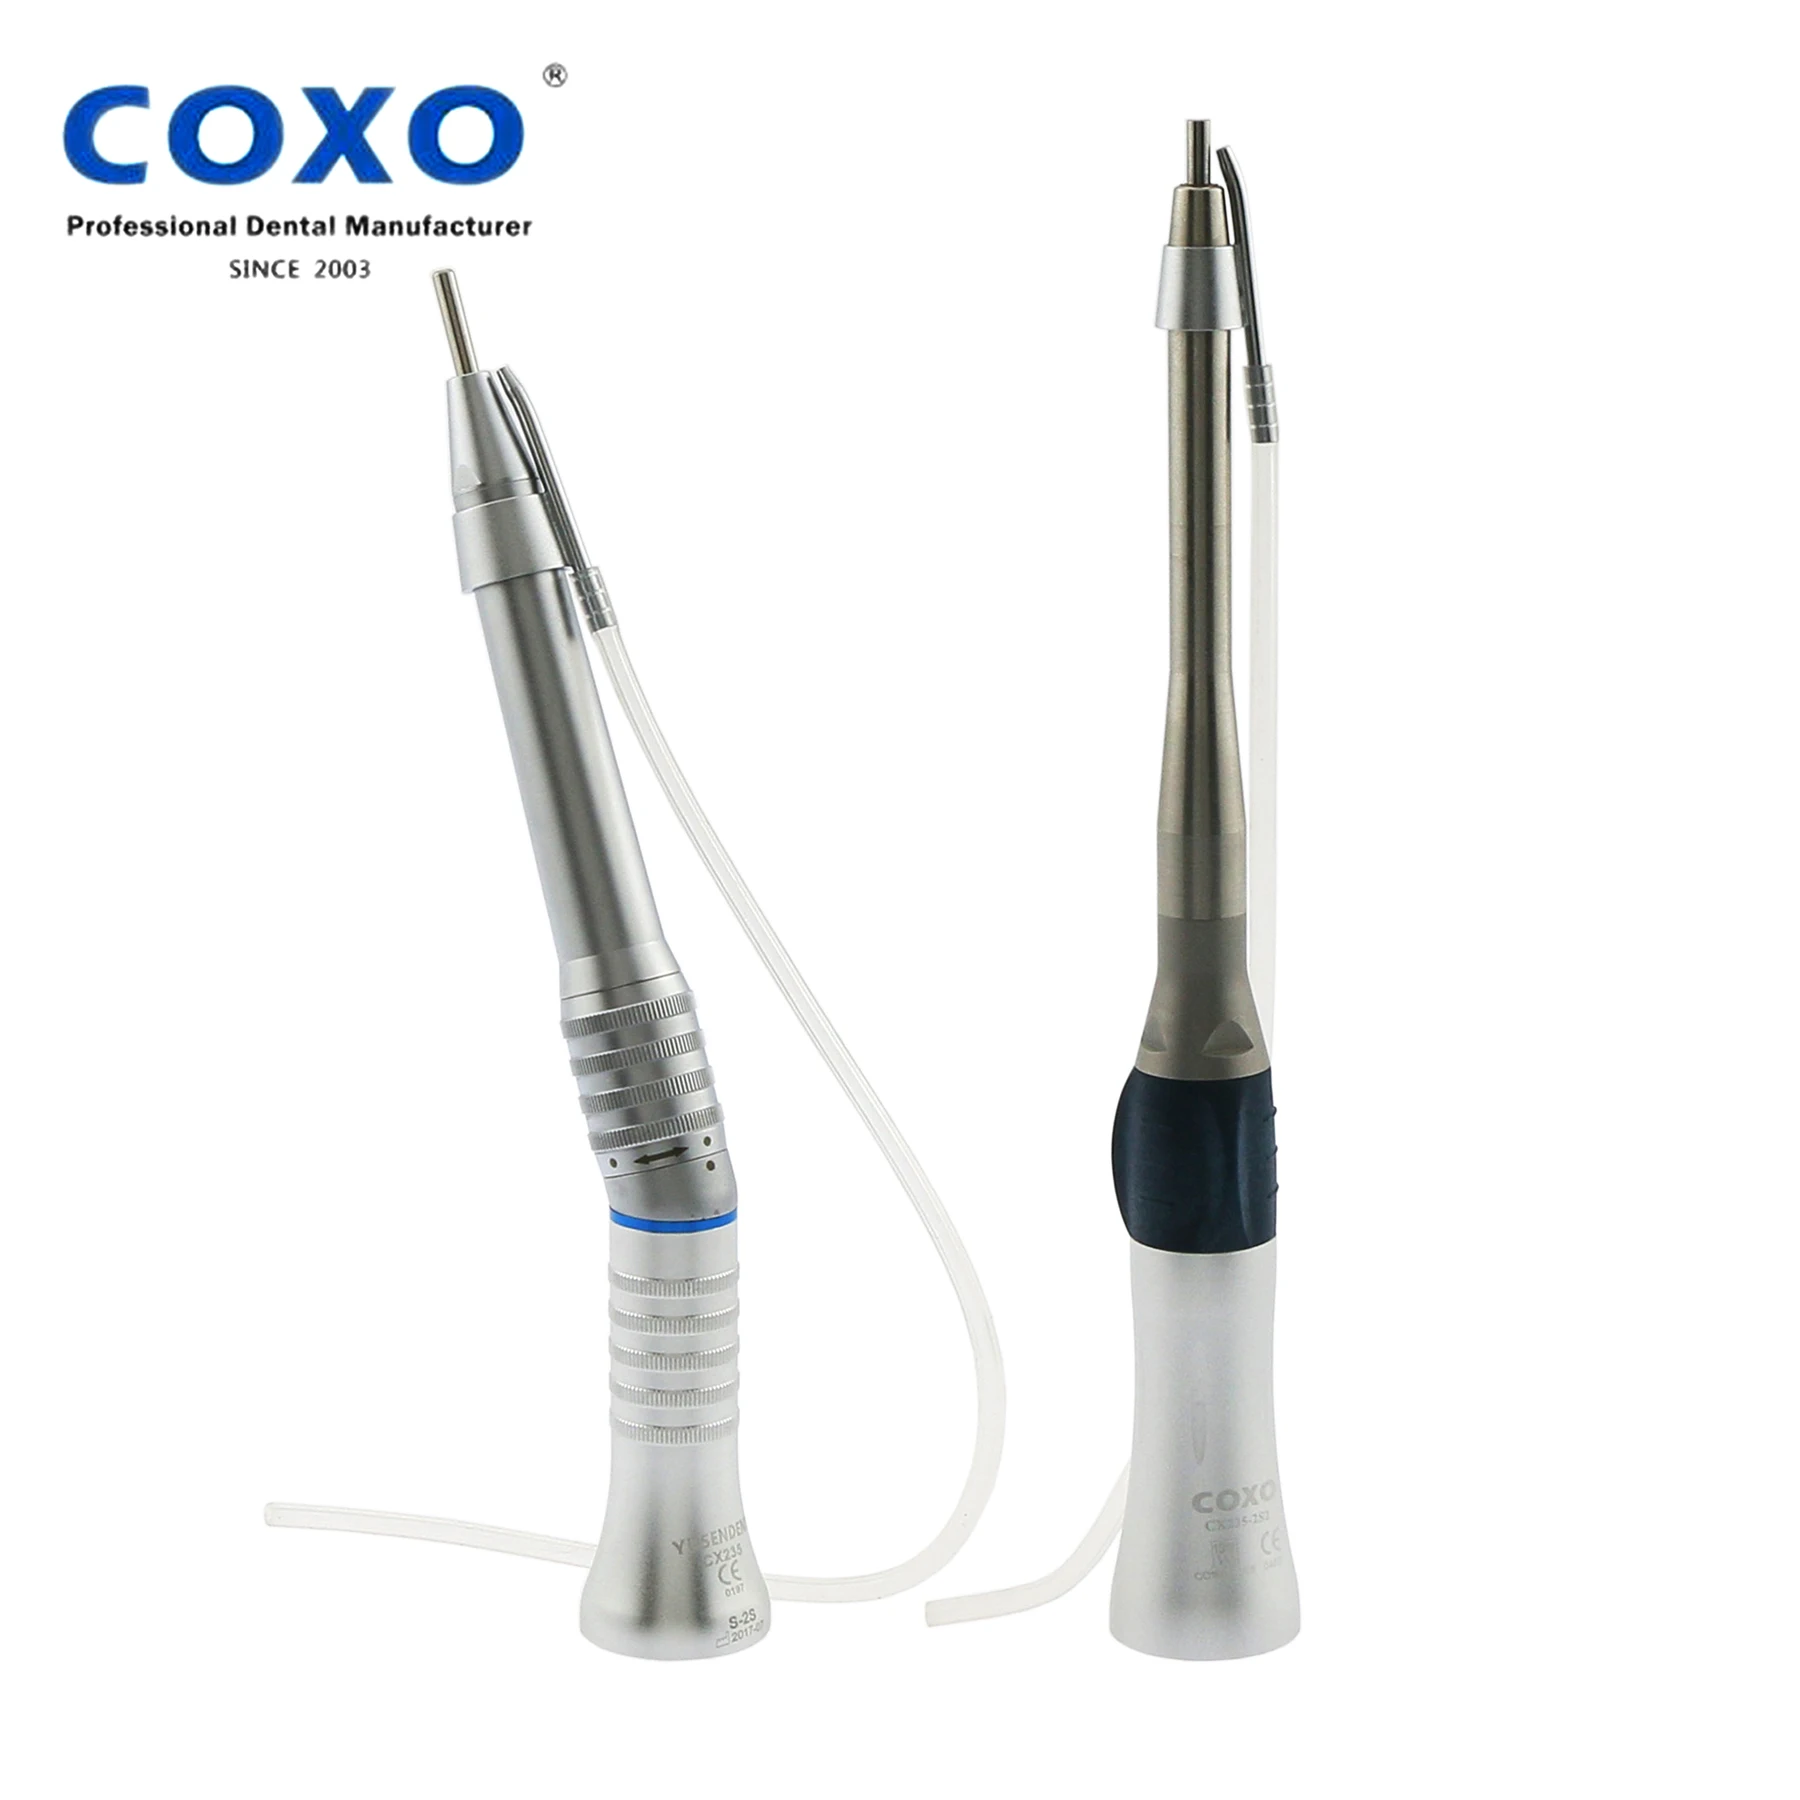 COXO YUSENDENT Dental 1:1 Low Speed Micro Surgery 20°Angle Surgical Surgery Straight Handpiece Fit For ISO E type KaVo NSK